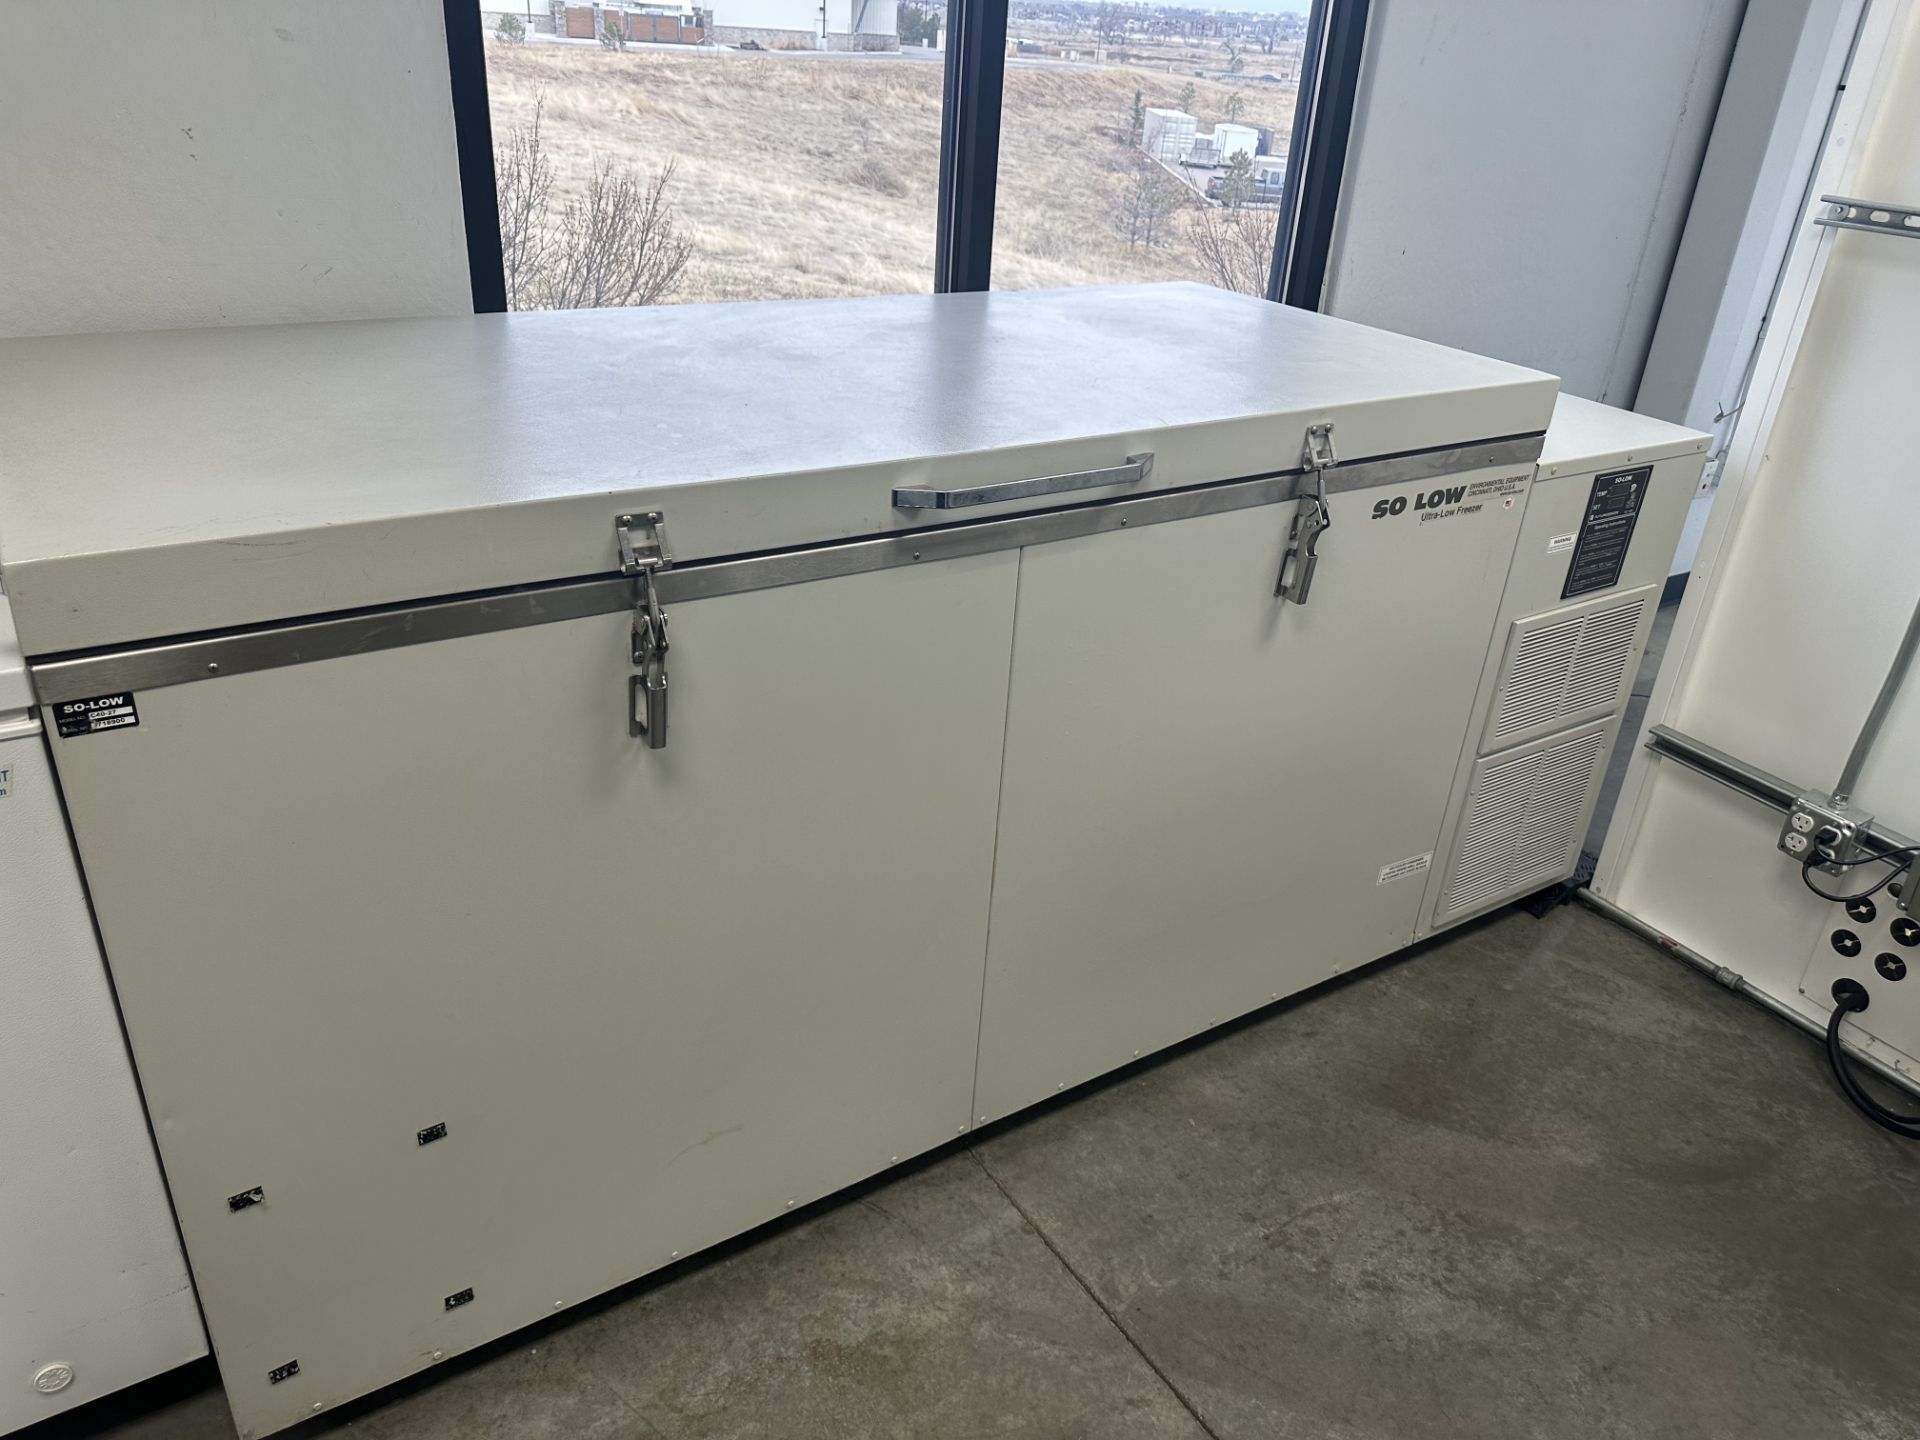 Lot of (3) Used So Low 27 CuFt Explosion Proof Chest-Style Freezer. Model C40-27 - Image 9 of 19